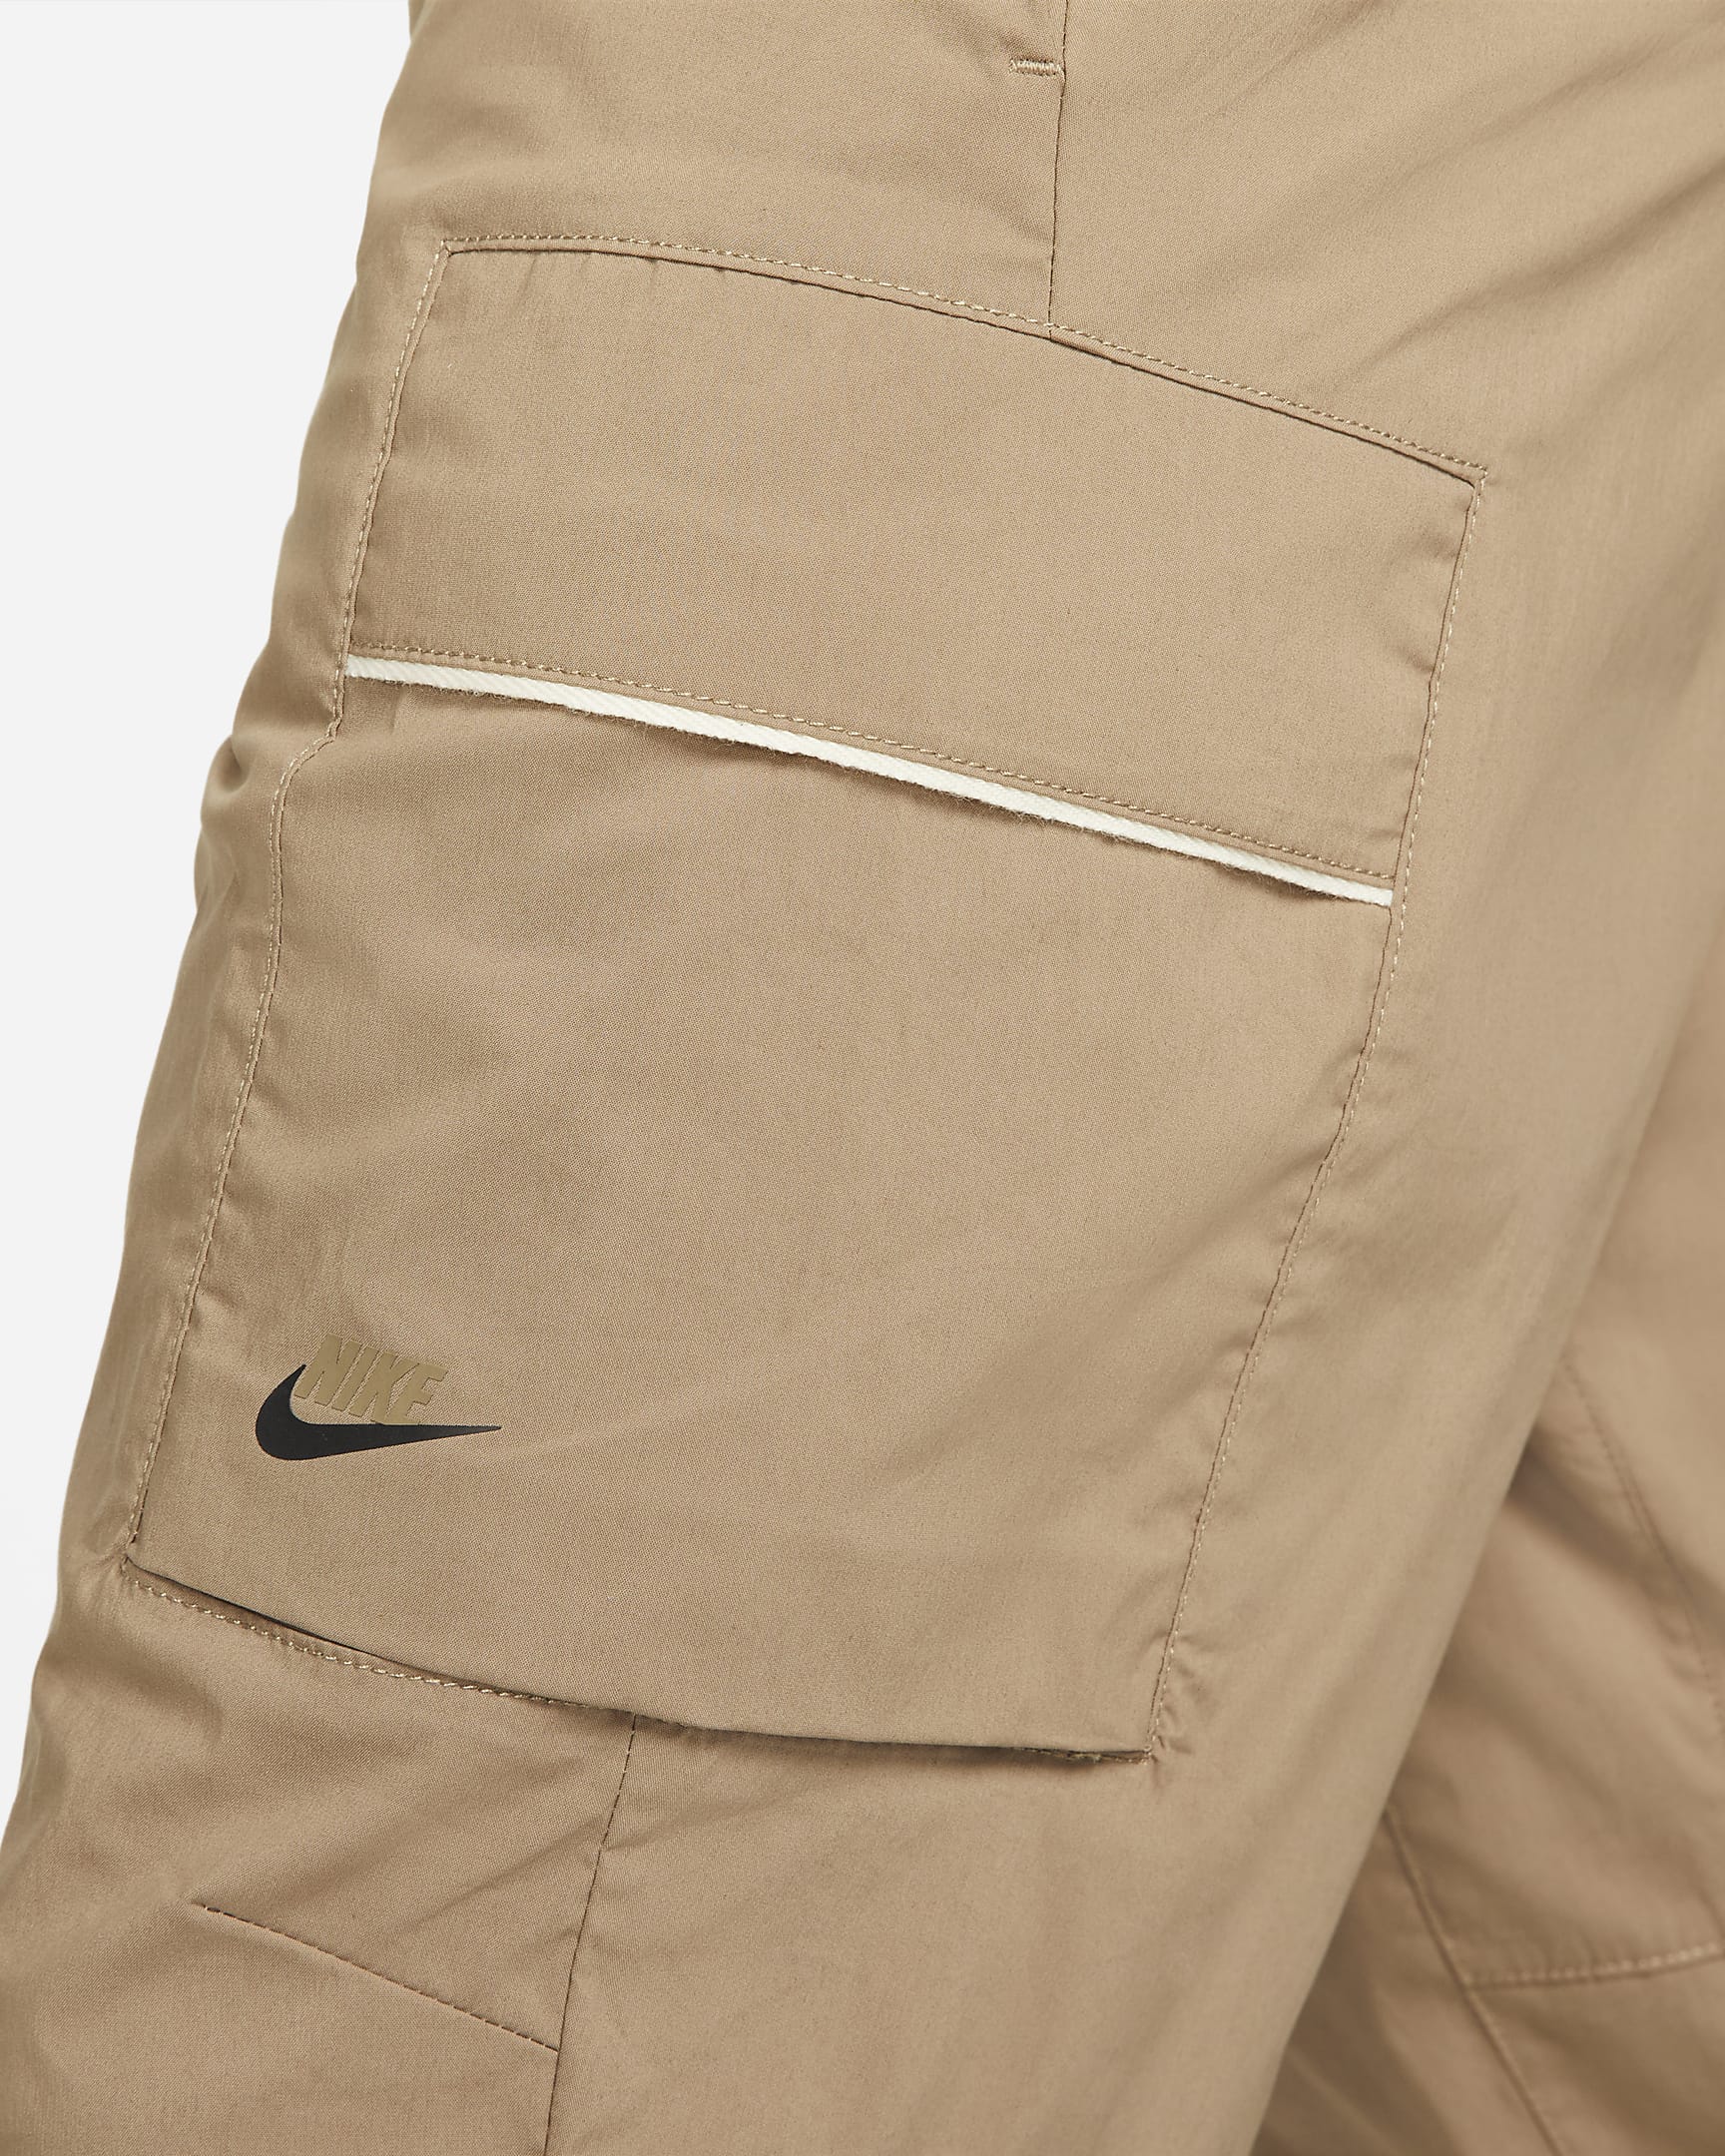 nike-sportswear-style-essentials-mens-woven-unlined-cargo-pants-8DqpVJ-1.png